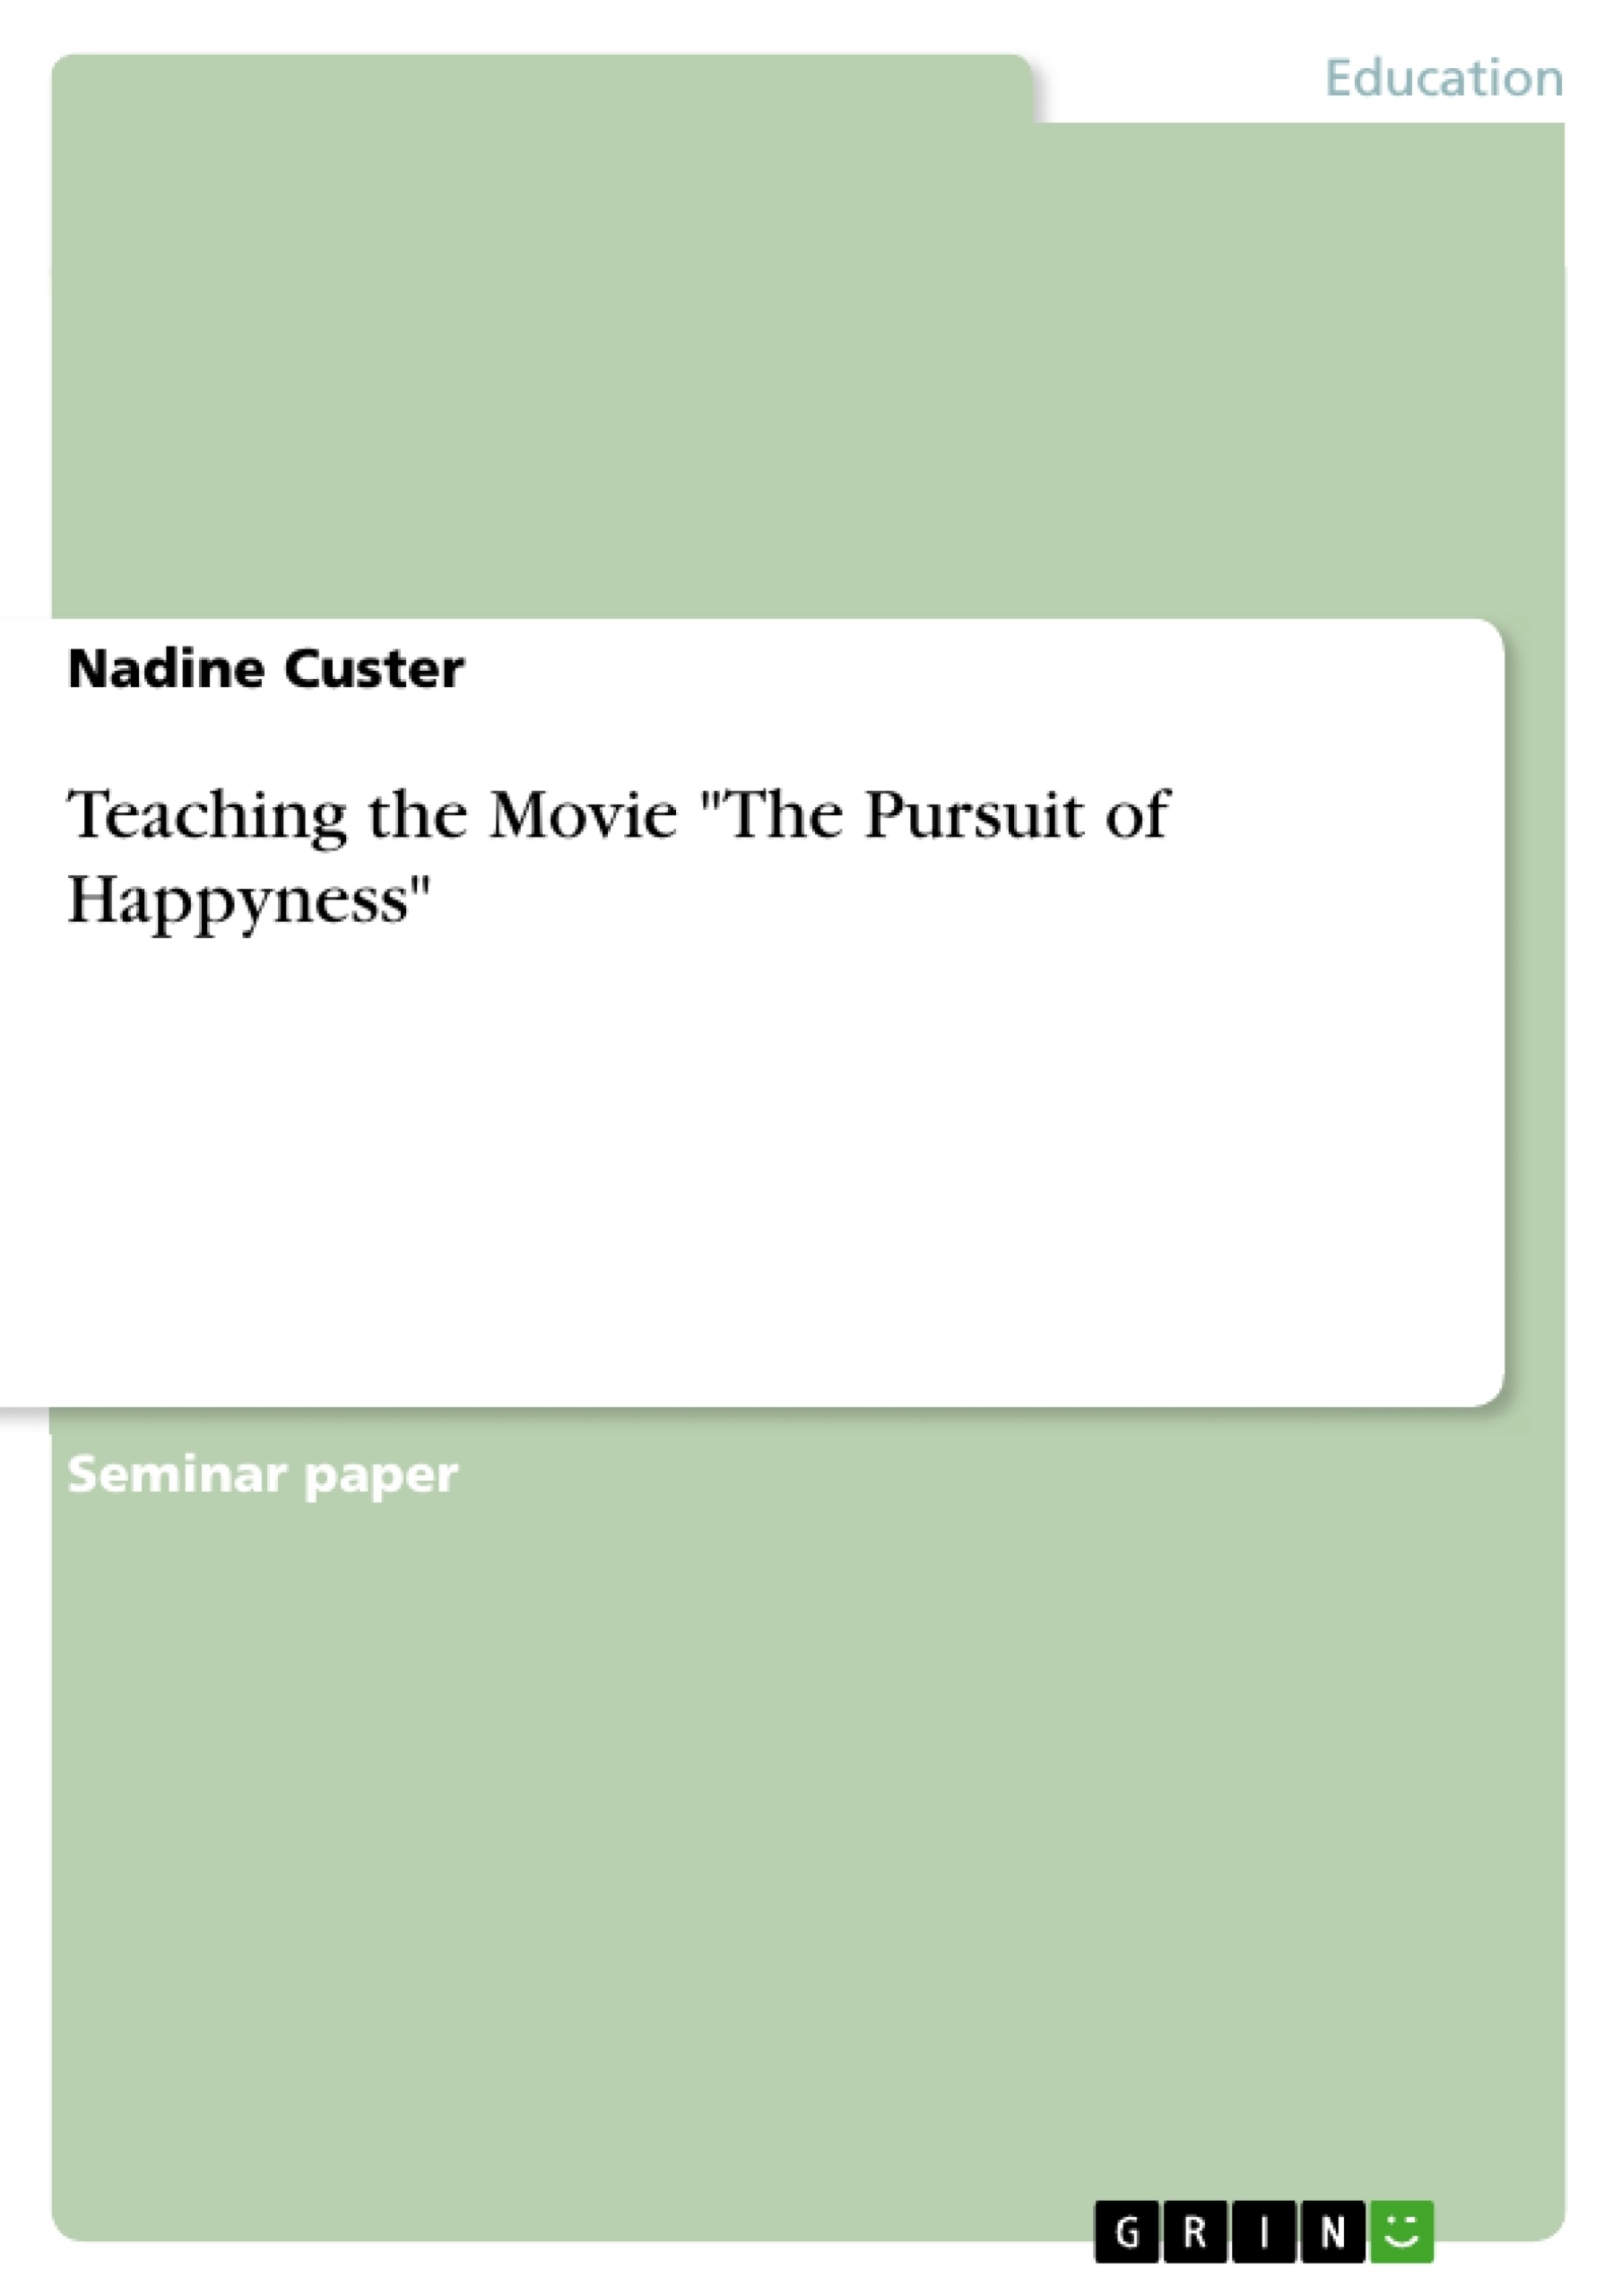 Title: Teaching the Movie "The Pursuit of Happyness"